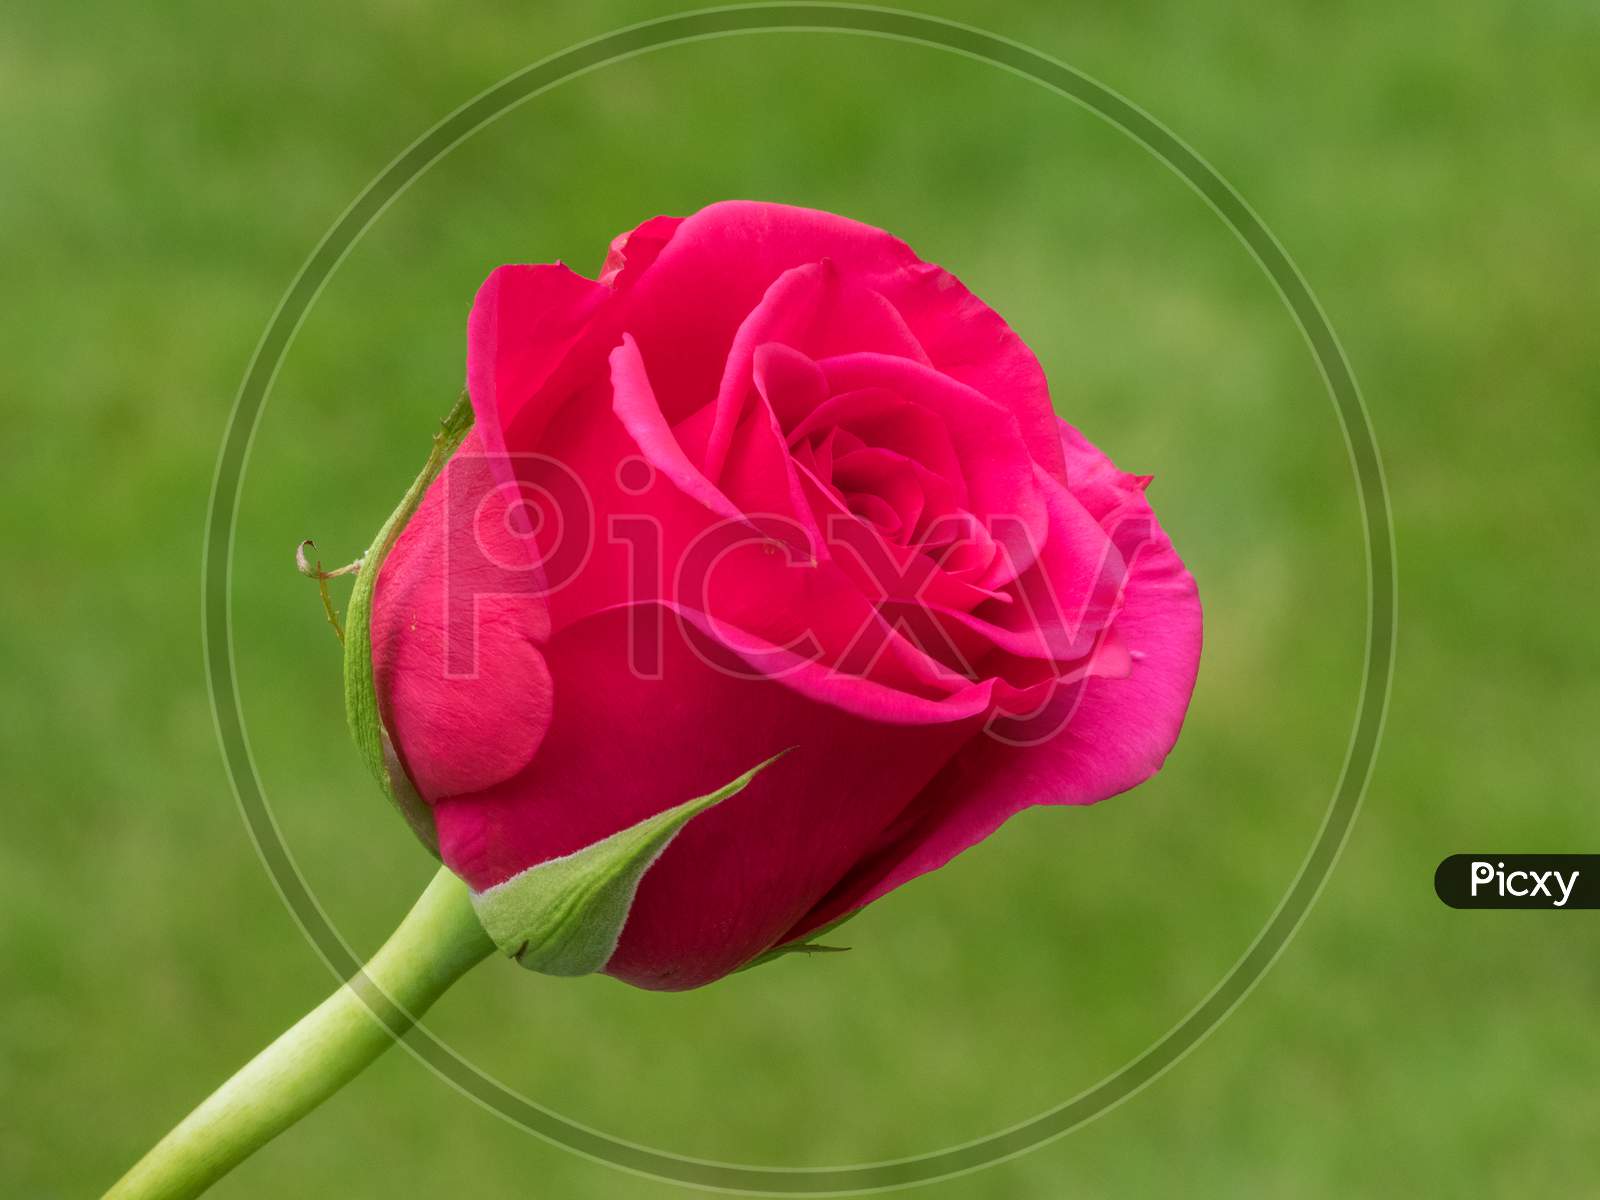 Close-Up View Of A Pink Hybrid T Rose